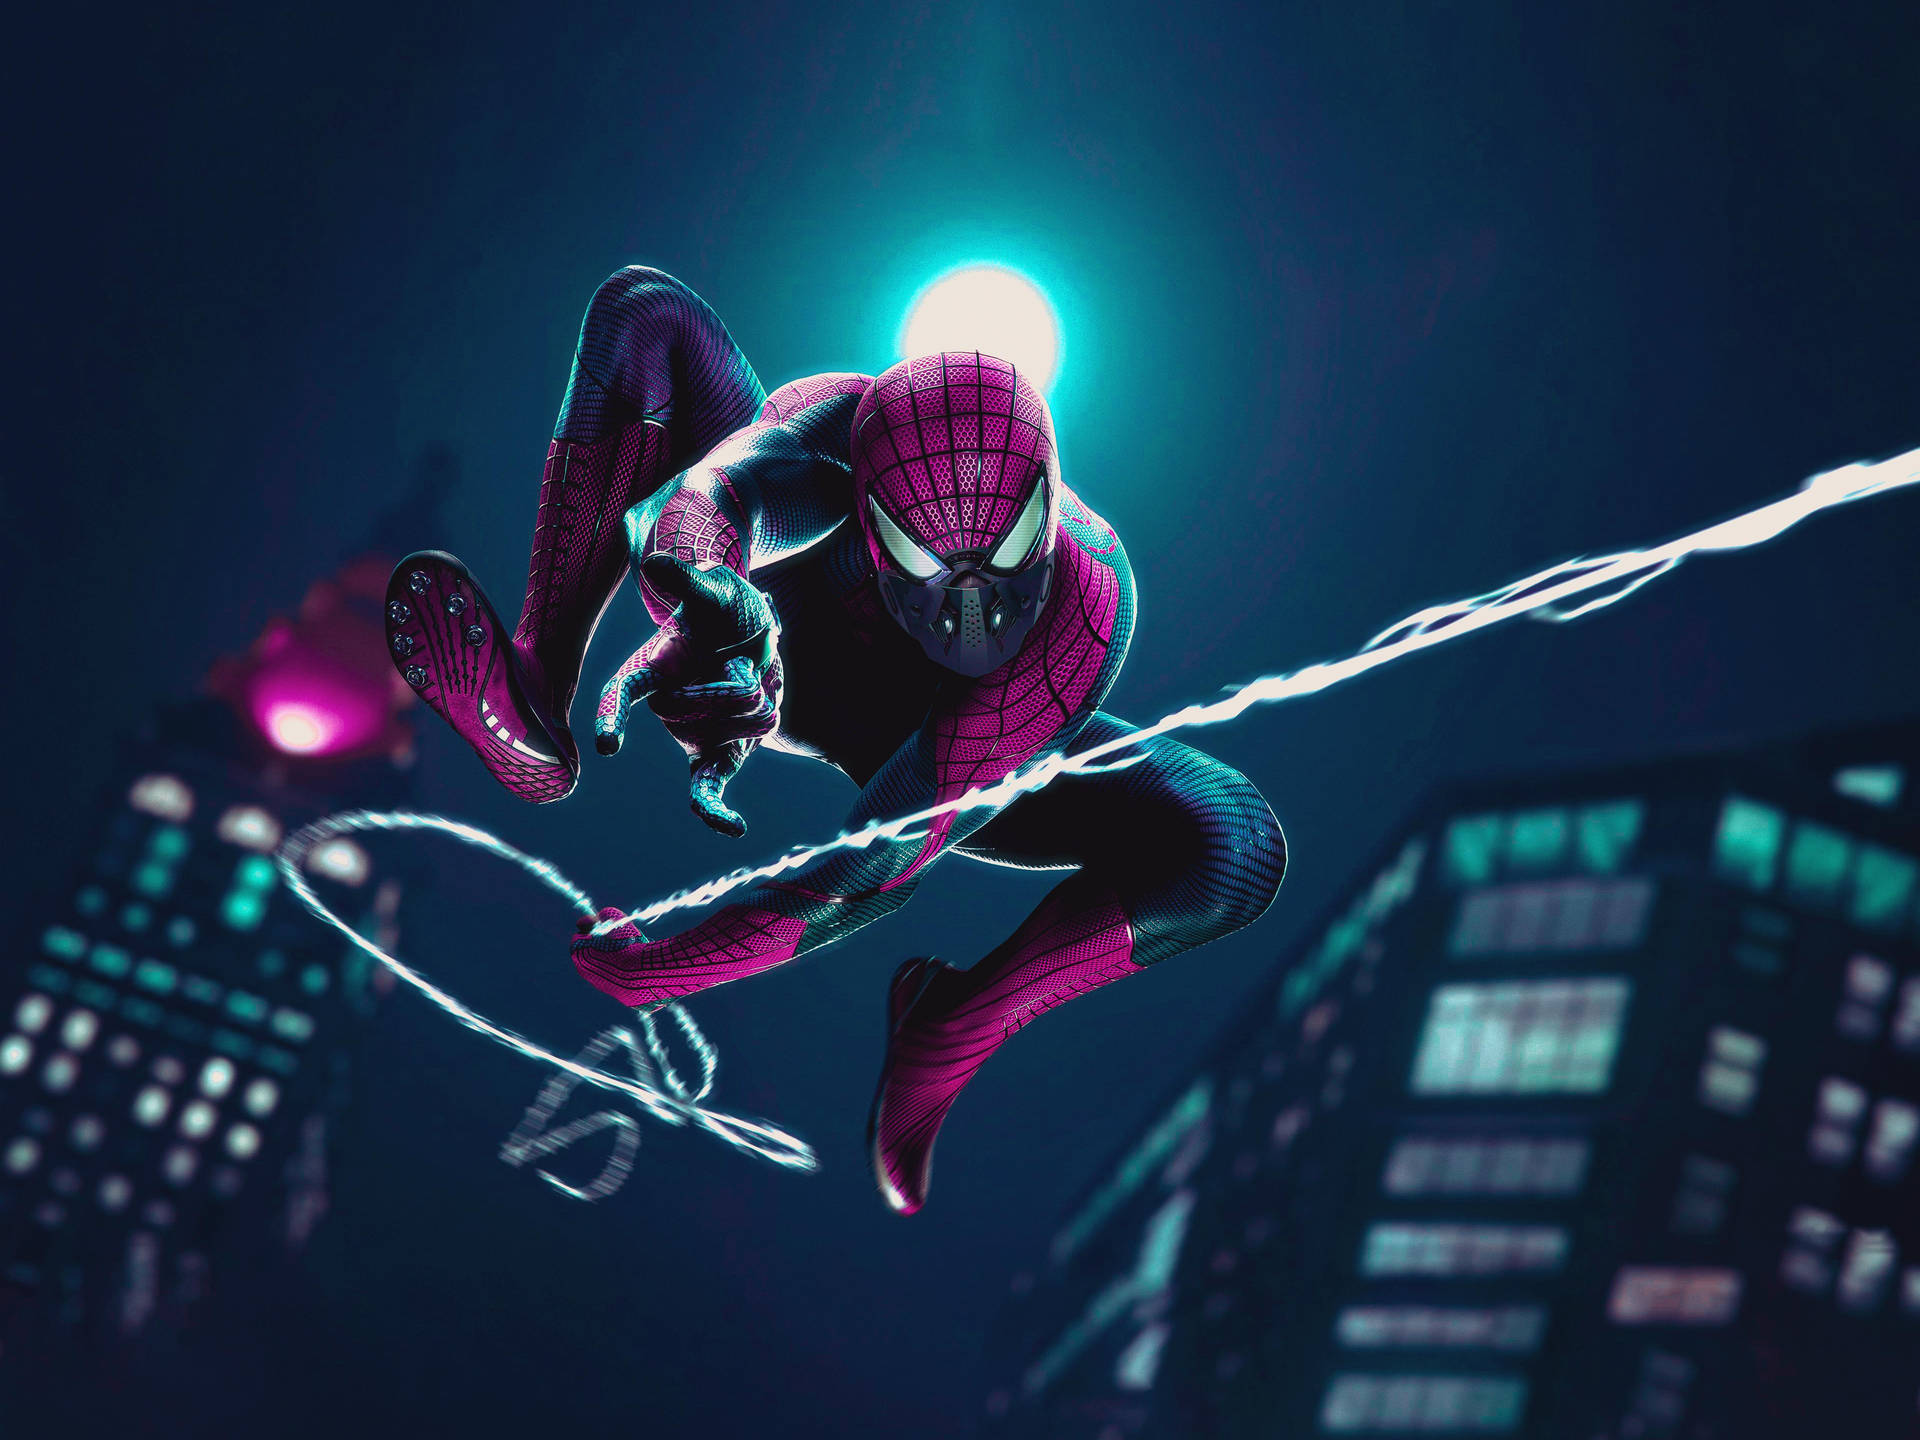 "A thrilling look at The Amazing Spider-Man." Wallpaper